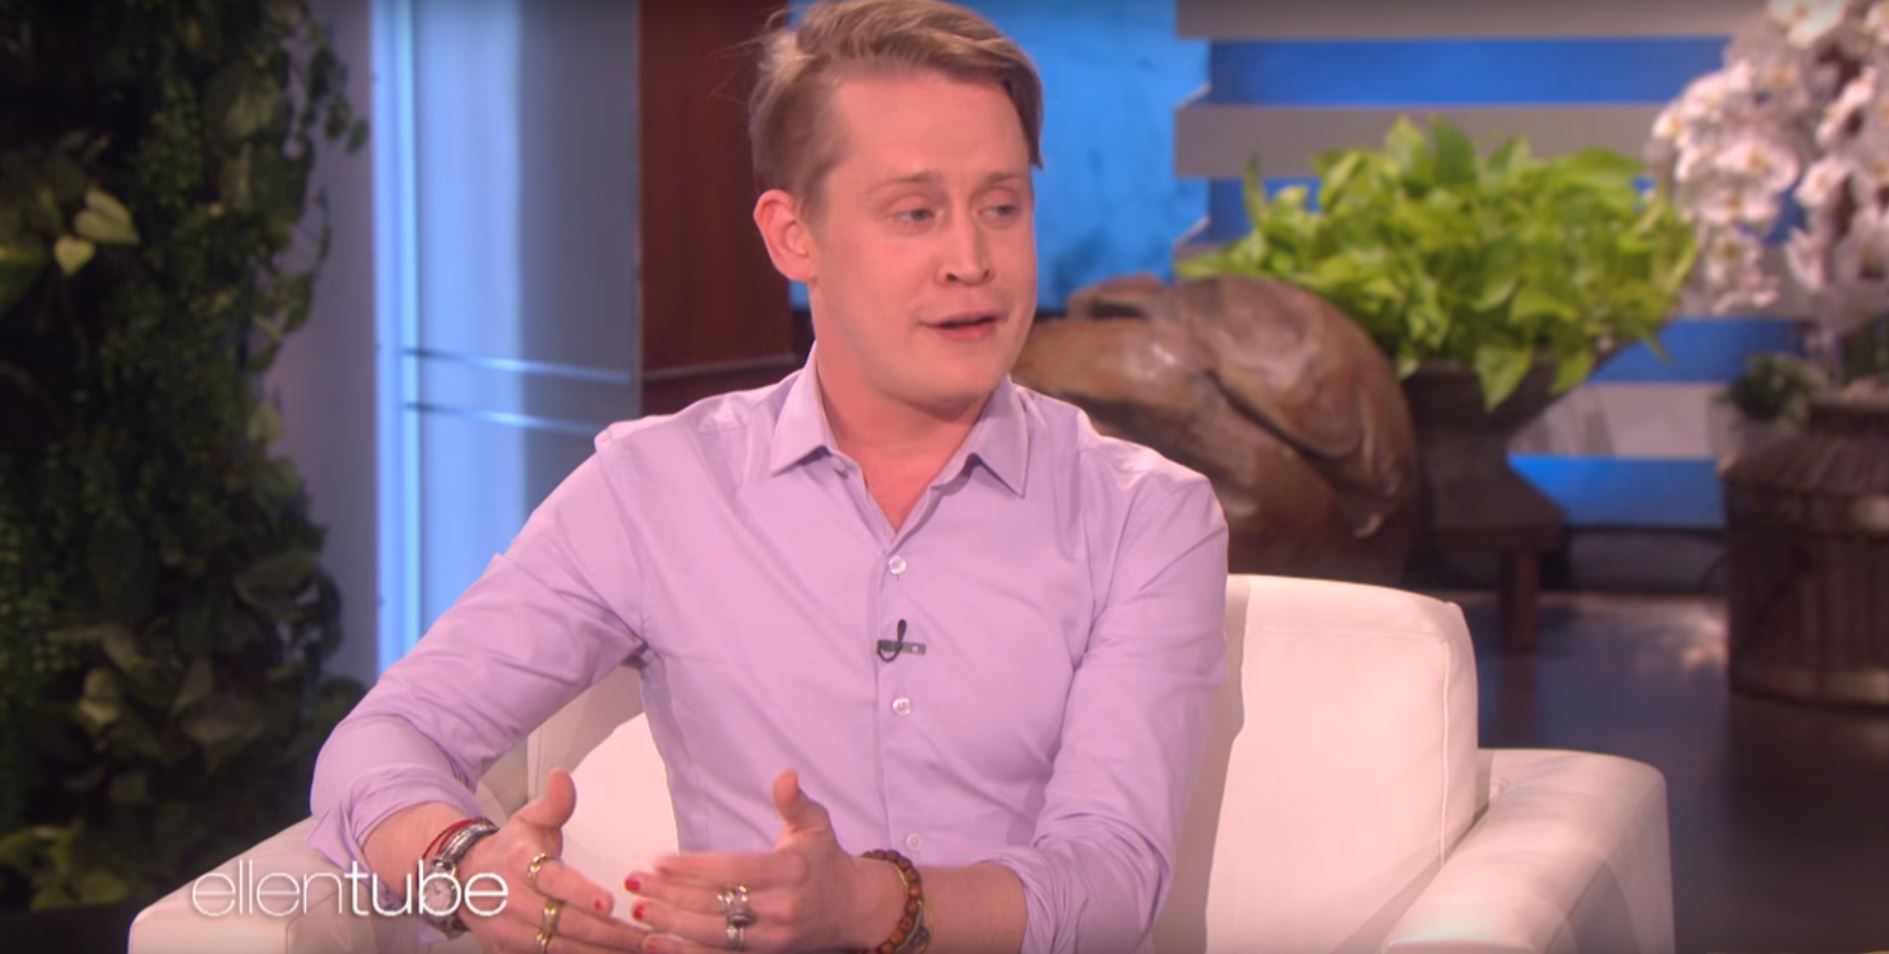 Macaulay Culkin Opens Up About 'Home Alone' And 'My Girl' In New Interview With Ellen